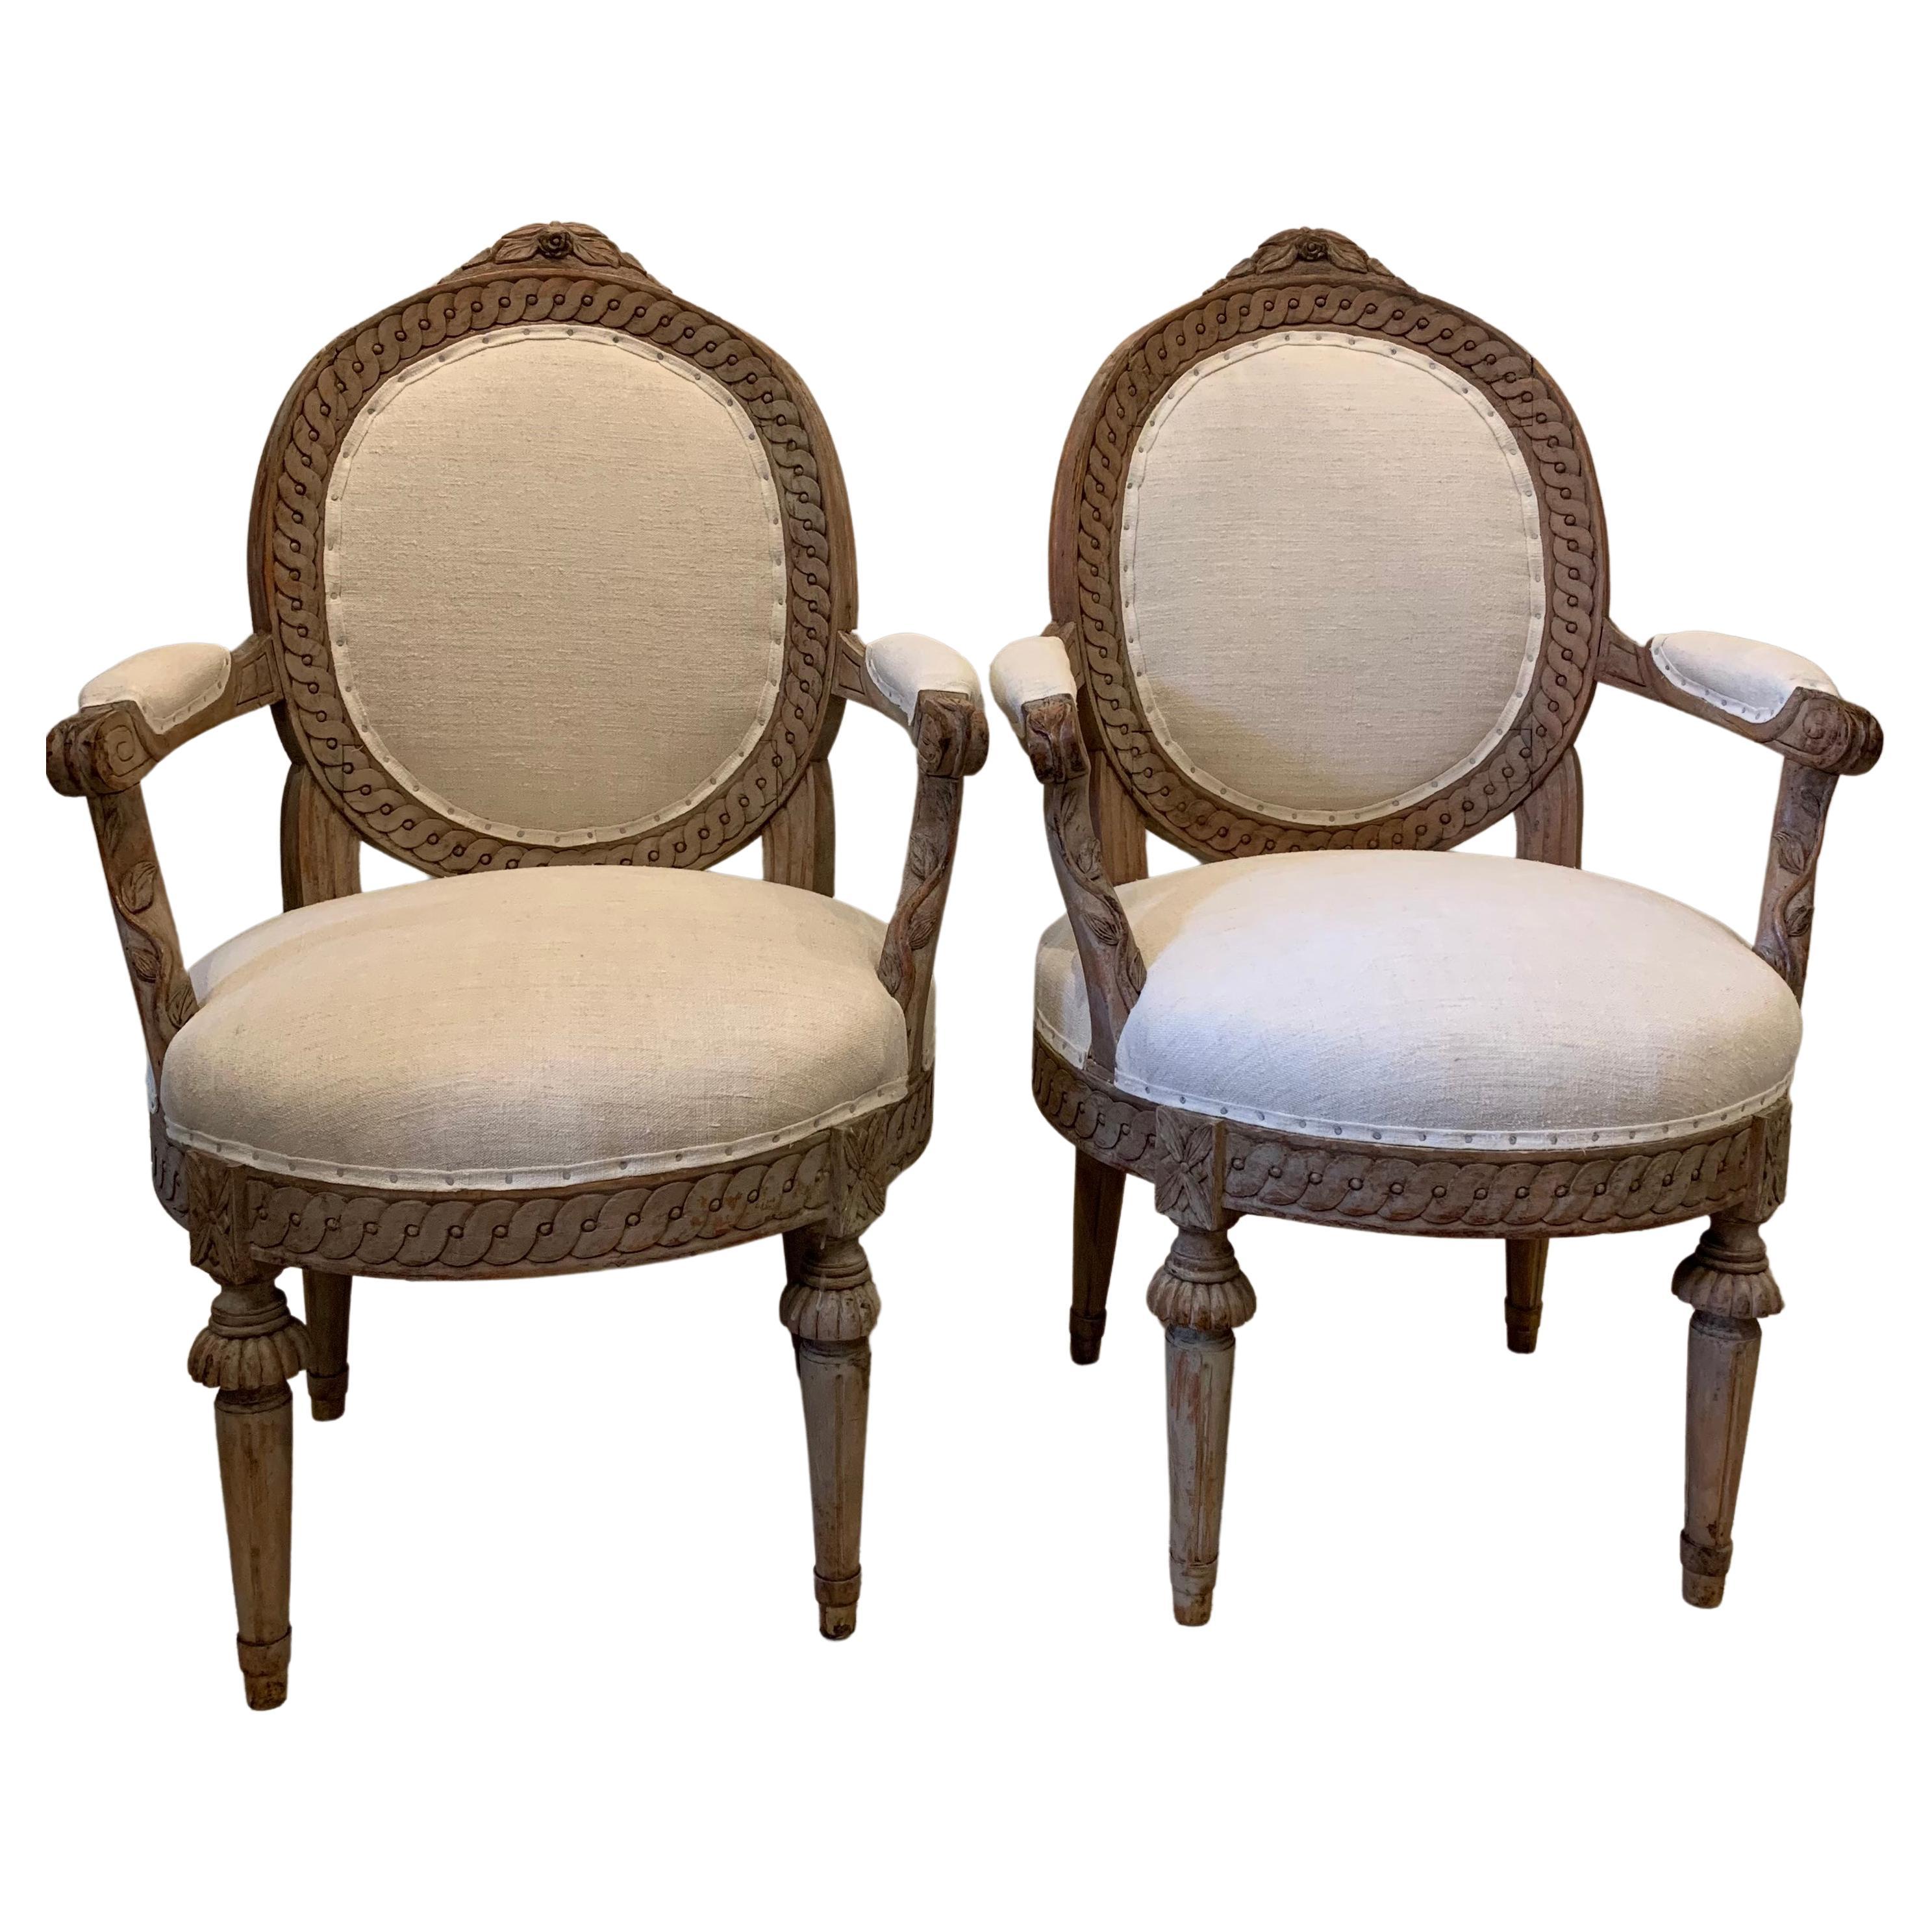 Pair of 19th Century Swedish Decorative Armchairs with French Linen Fabric